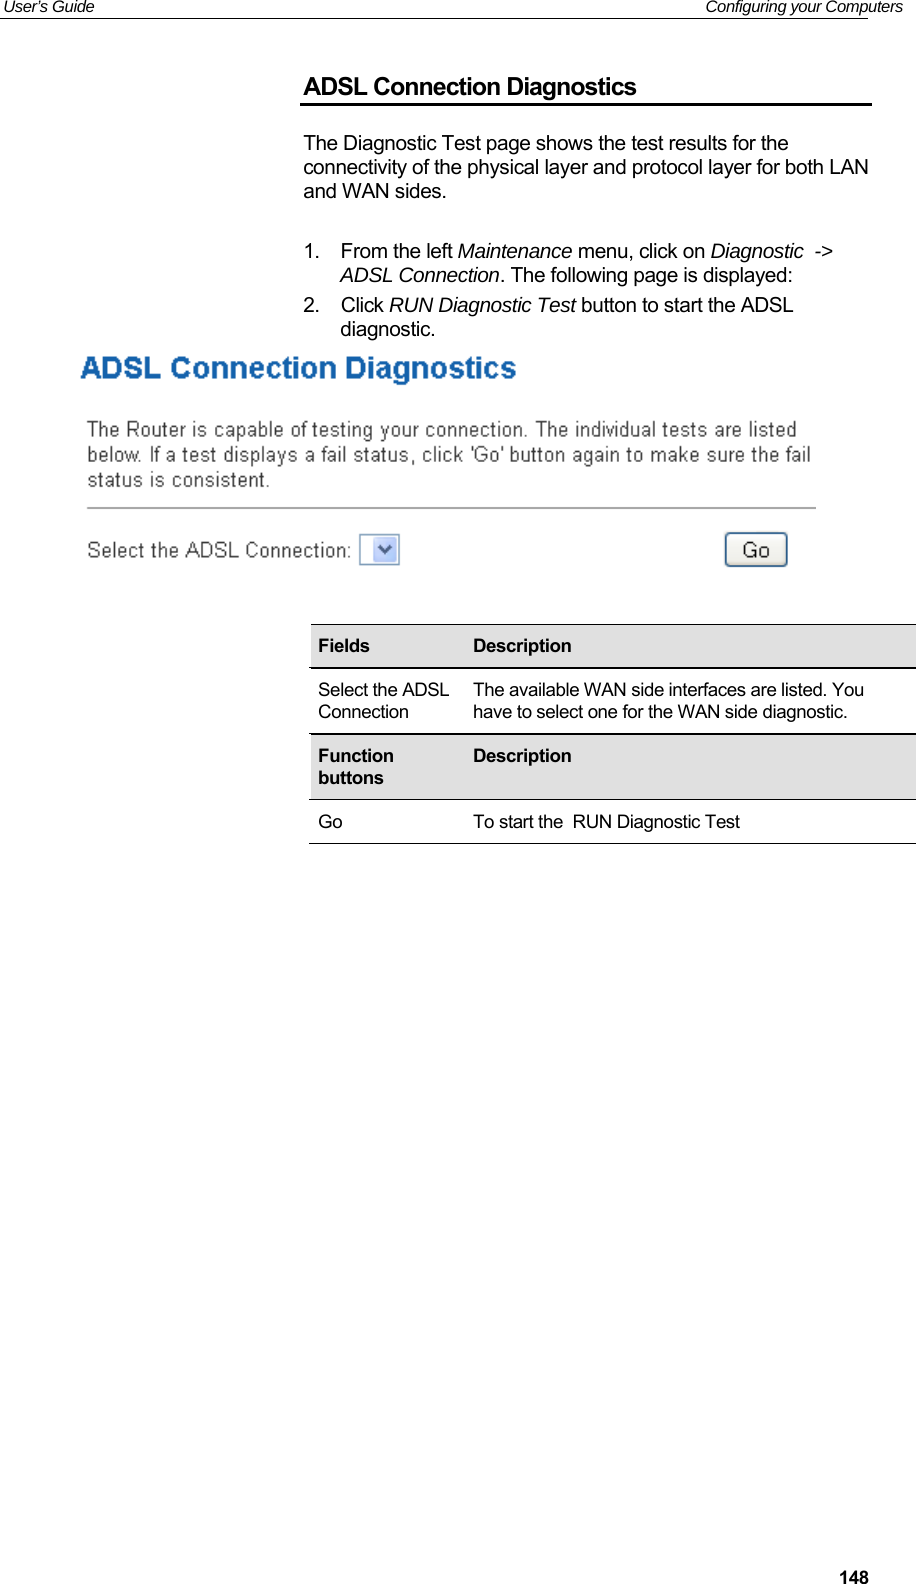 User’s Guide   Configuring your Computers  148ADSL Connection Diagnostics The Diagnostic Test page shows the test results for the connectivity of the physical layer and protocol layer for both LAN and WAN sides.  1.  From the left Maintenance menu, click on Diagnostic  -&gt; ADSL Connection. The following page is displayed: 2.  Click RUN Diagnostic Test button to start the ADSL diagnostic.                         Fields   Description Select the ADSL Connection The available WAN side interfaces are listed. You have to select one for the WAN side diagnostic. Function buttons Description Go  To start the  RUN Diagnostic Test 